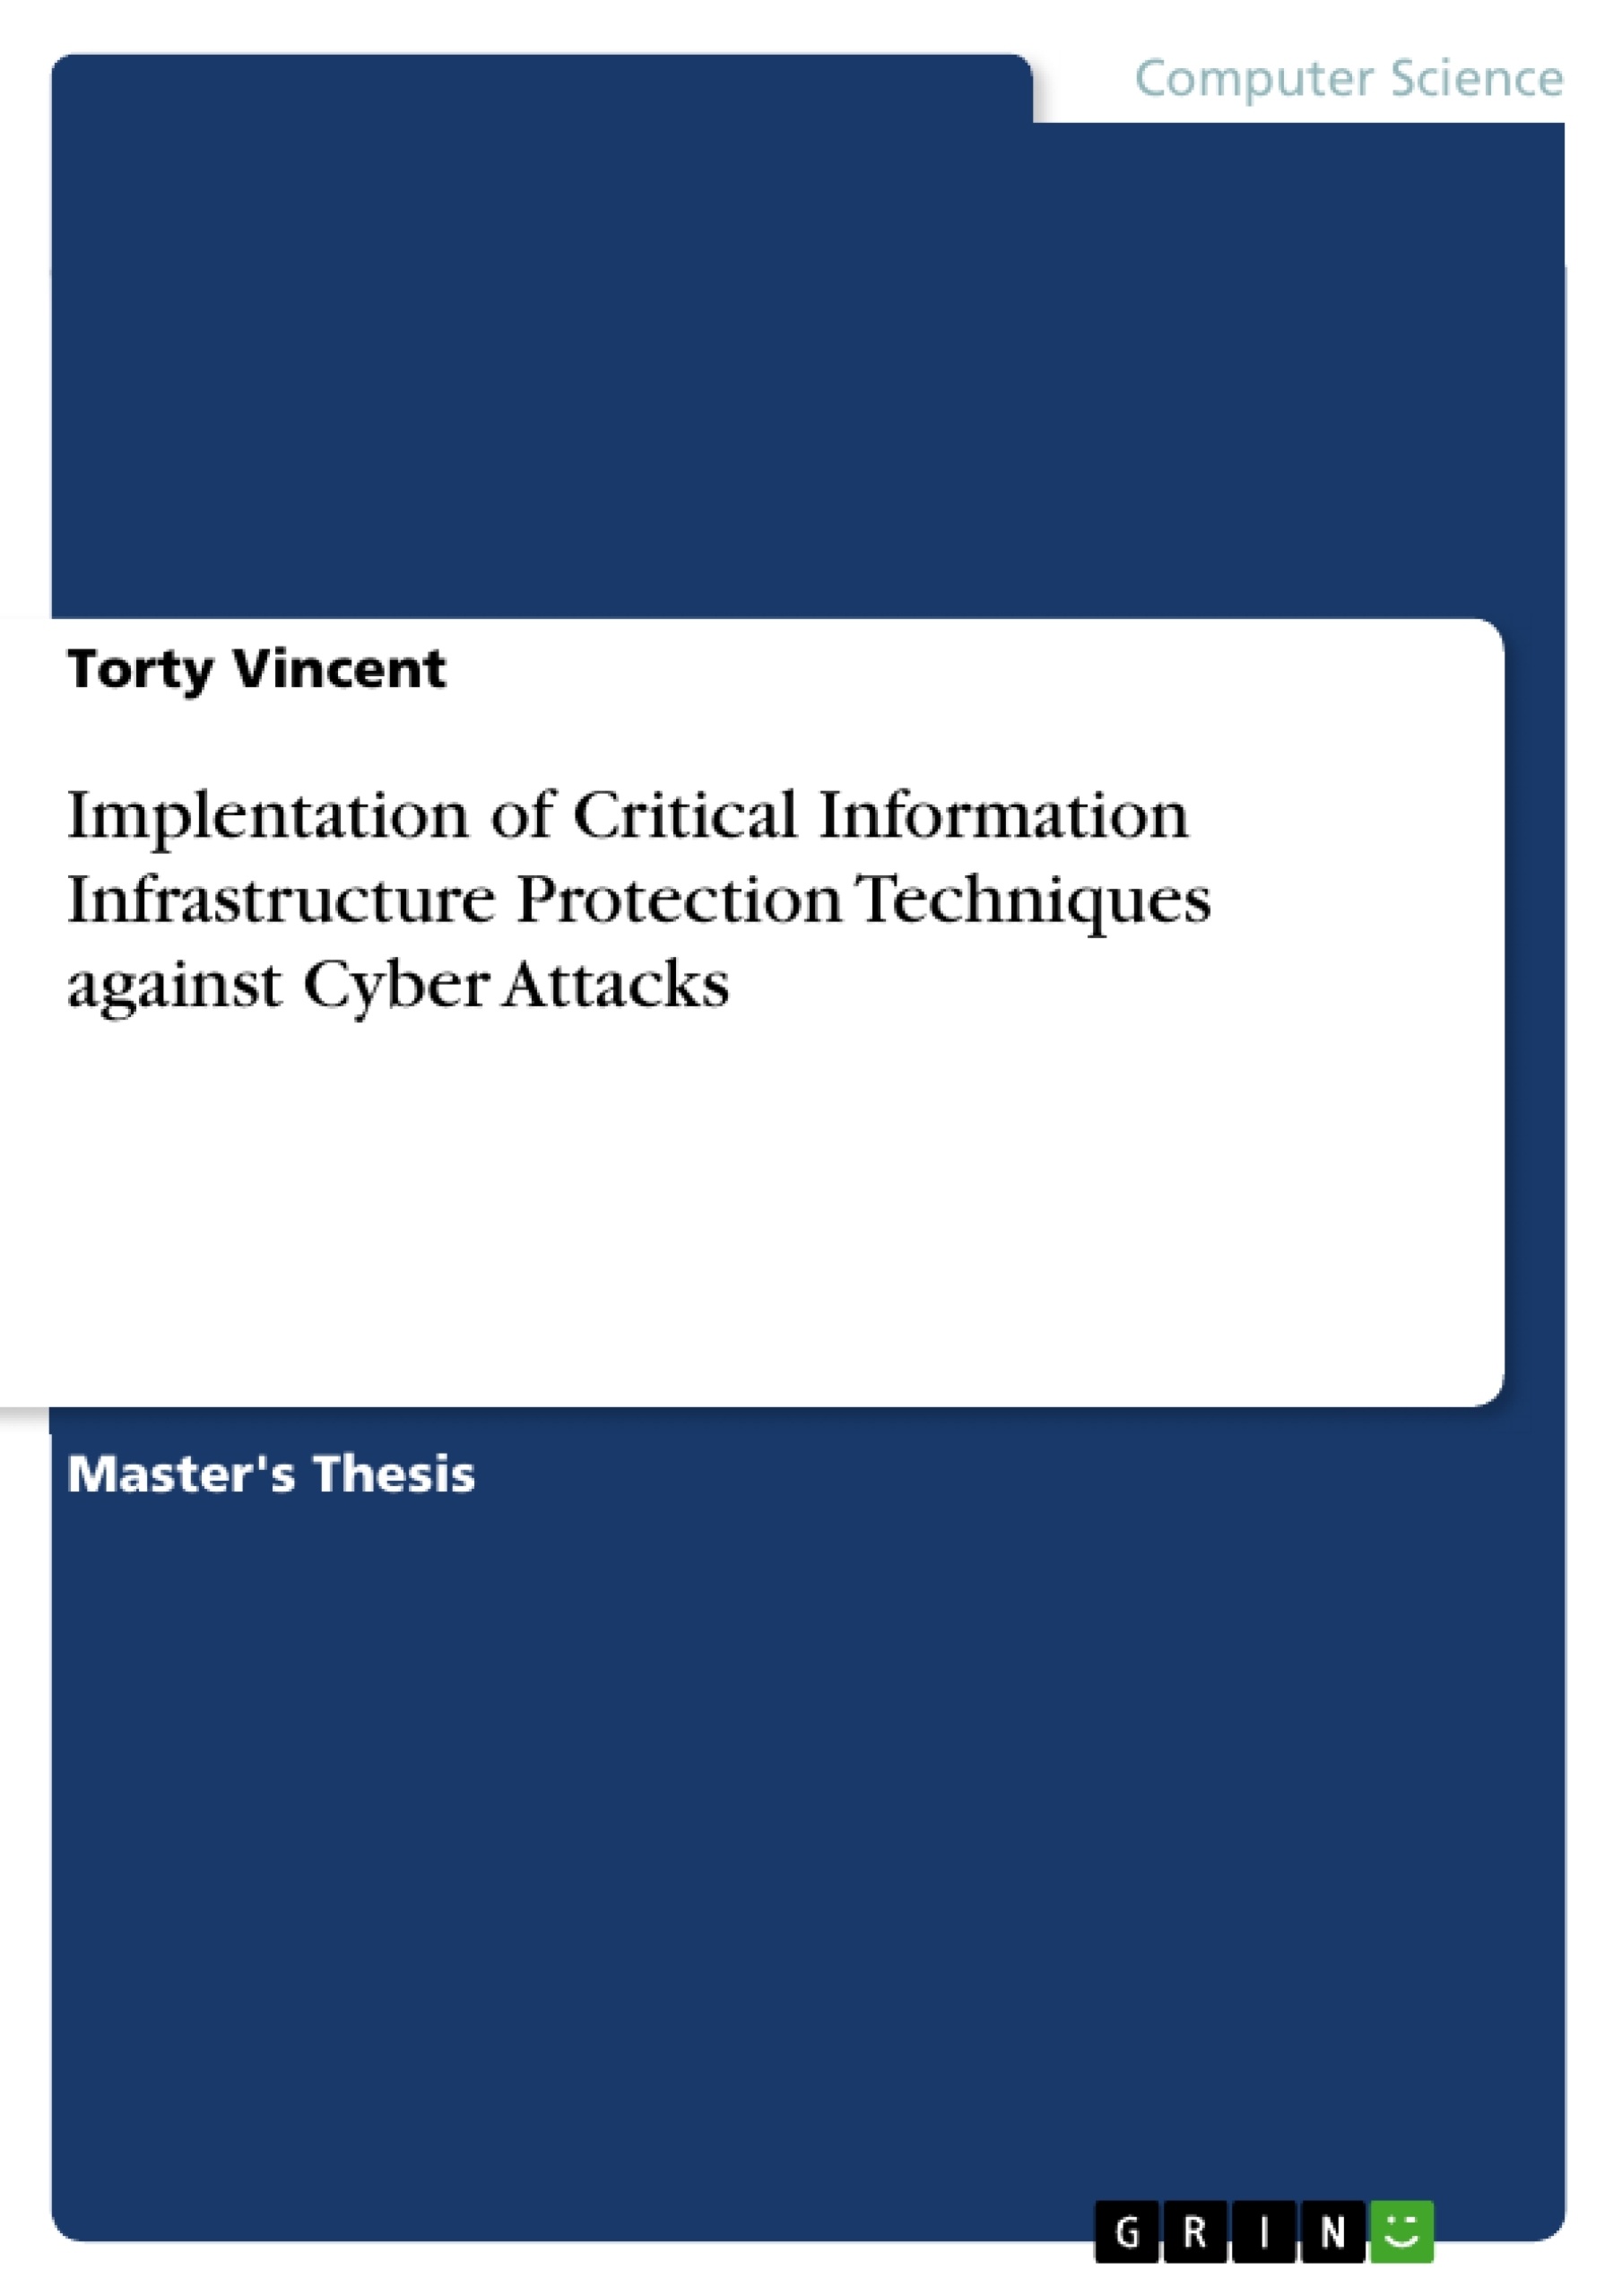 Título: Implentation of Critical Information Infrastructure Protection Techniques against Cyber Attacks